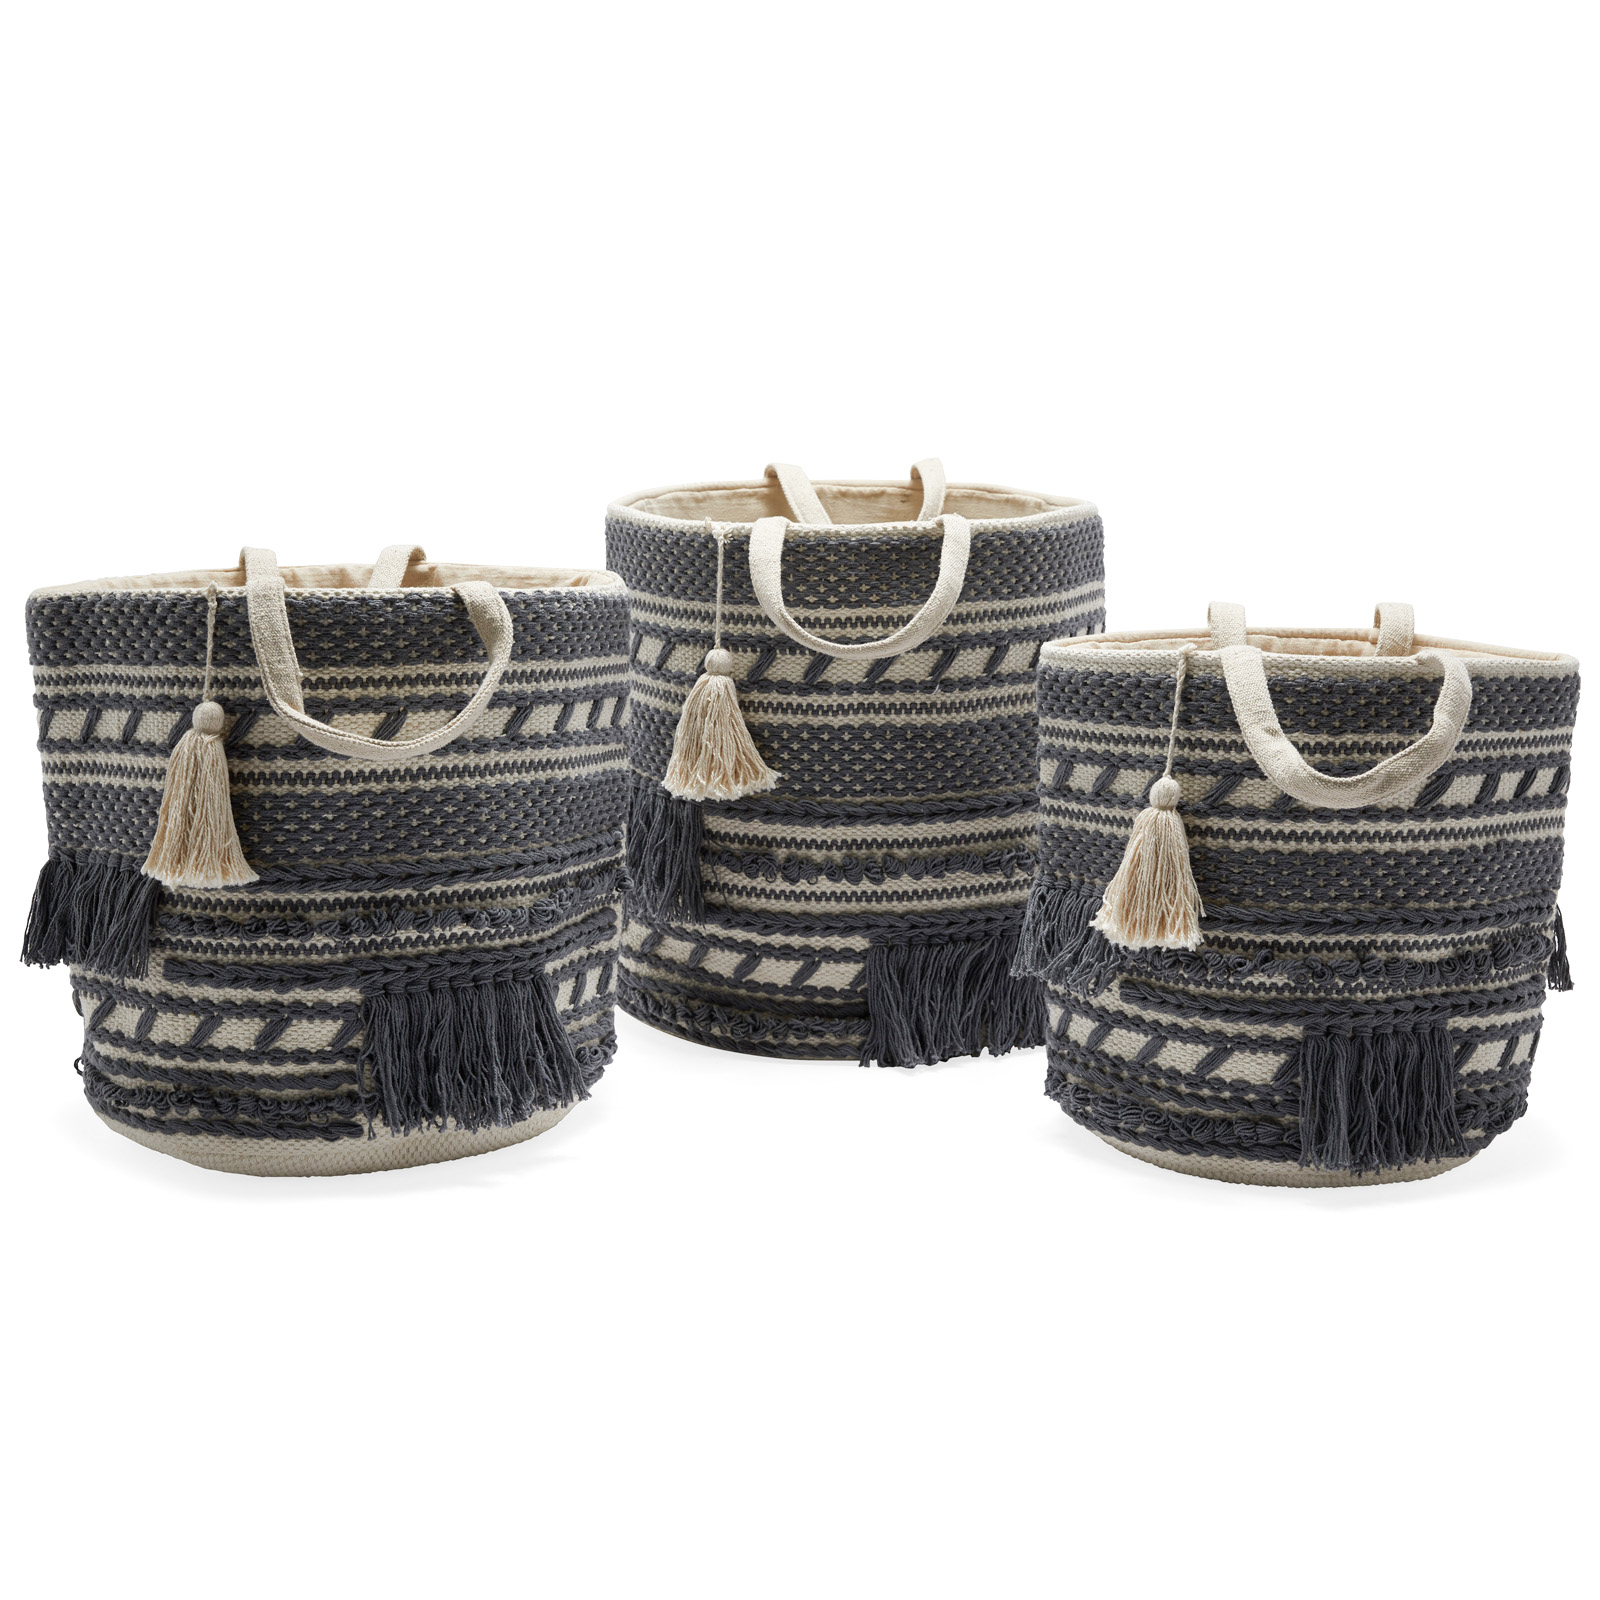 Hand Woven Macrame 3 Piece Basket Set, Natural and Charcoal by Drew Barrymore Flower Home - image 1 of 10